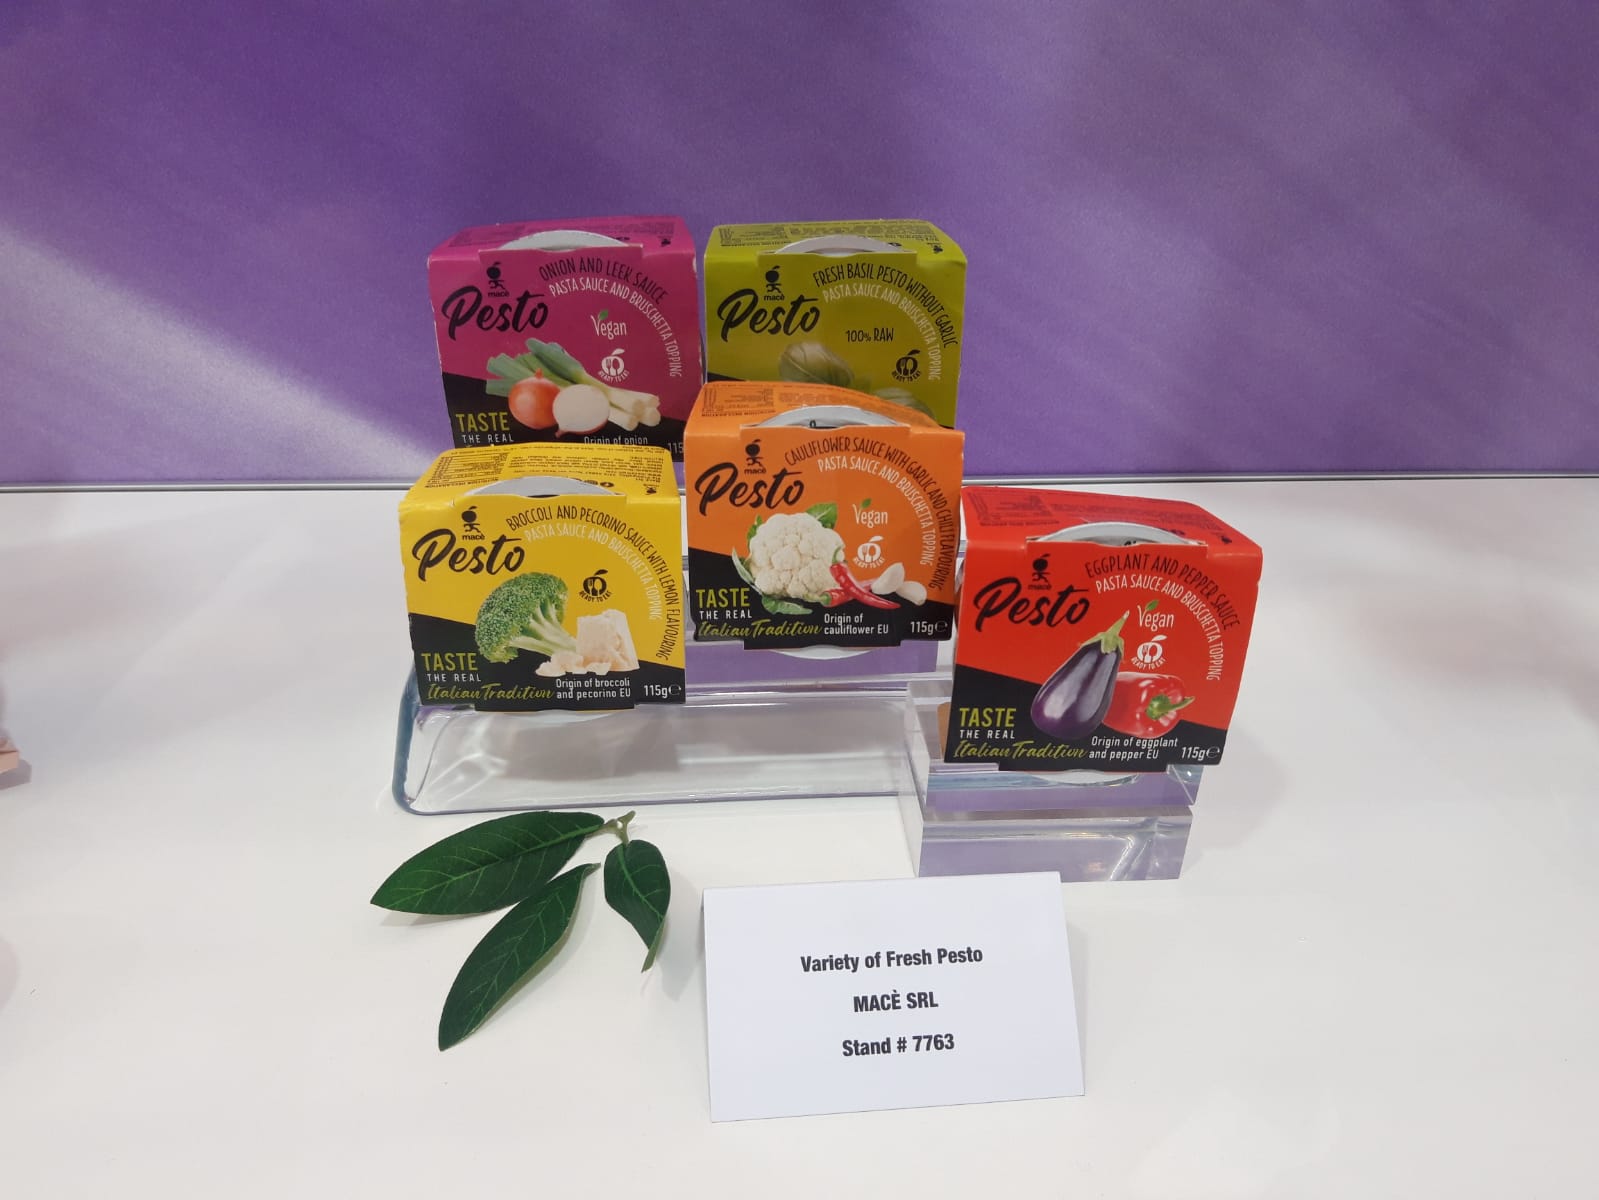 Macé's fresh HPP pestos and sauces exhibited at the New product expo area of PLMA Amsterdam 2022